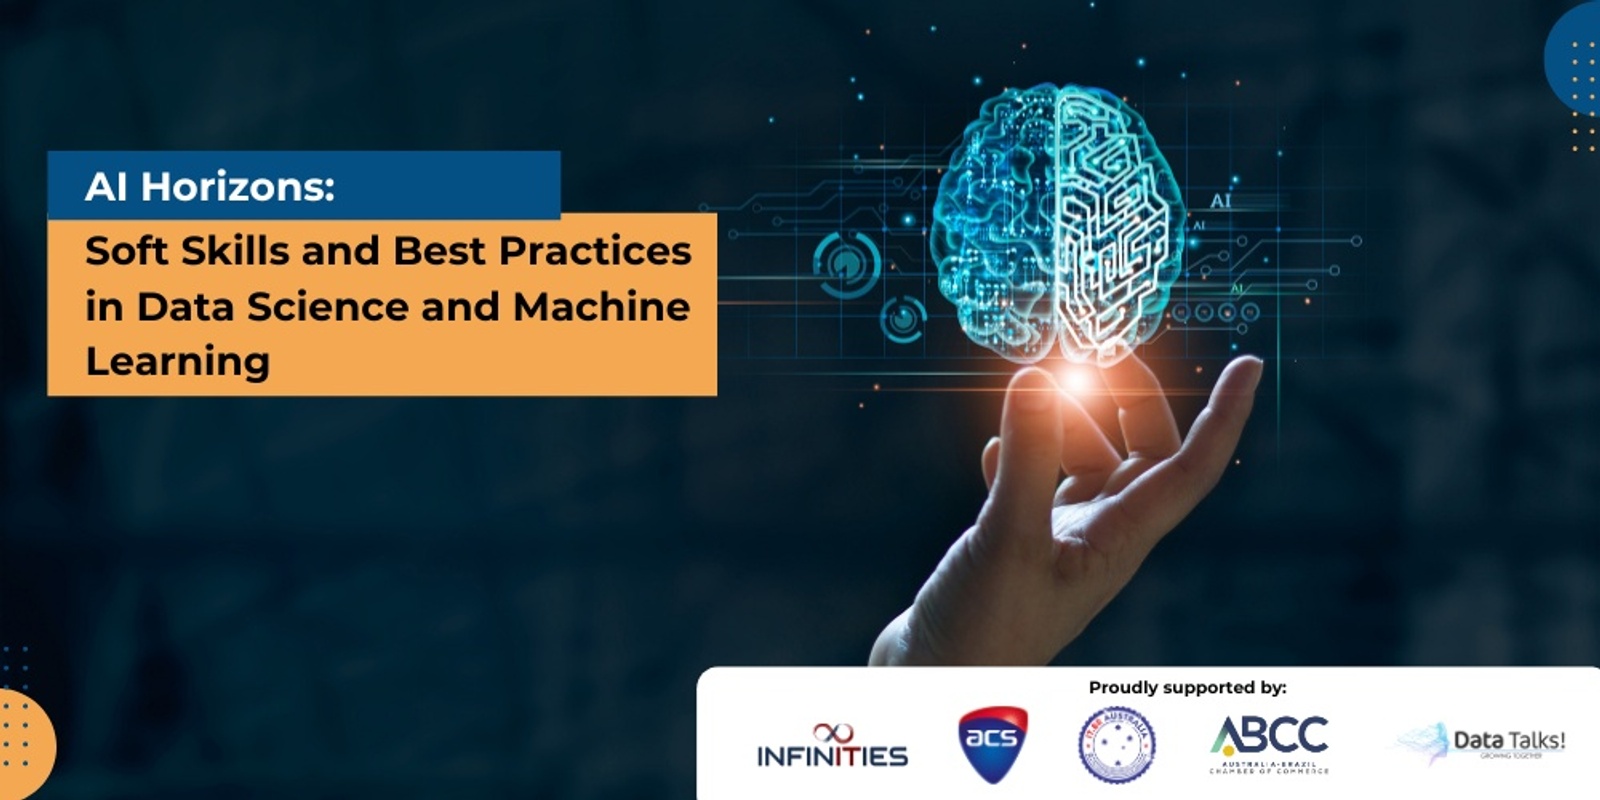 Banner image for AI Horizons: Soft Skills and Best Practices in Data Science and Machine Learning